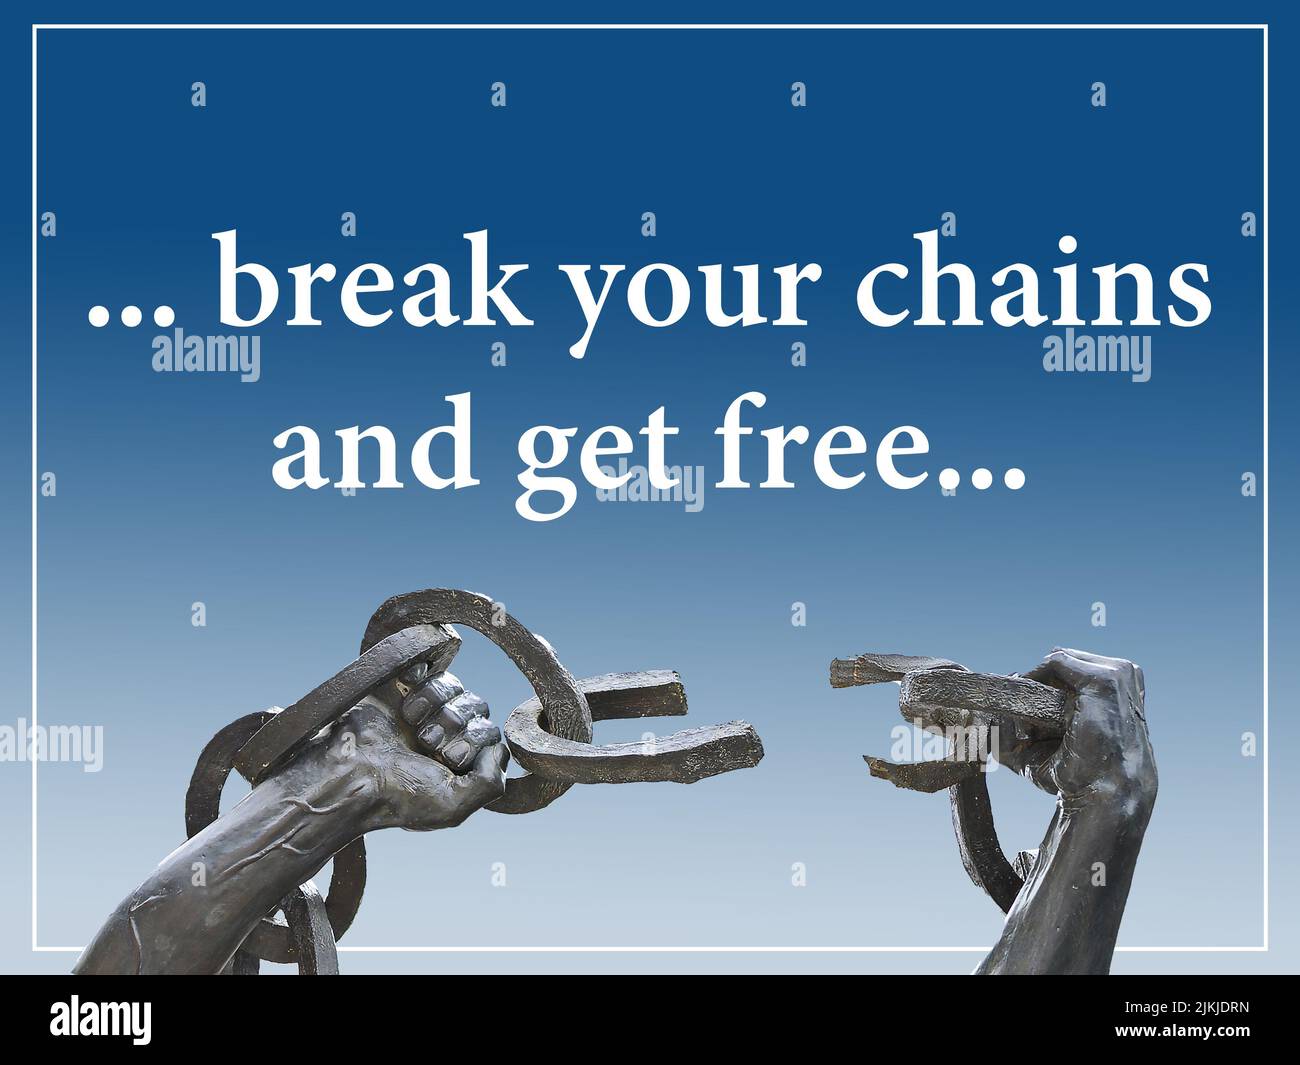 A text 'Break your chains and get free' on a blue background with the top part of the freedom statue in Zambia Stock Photo